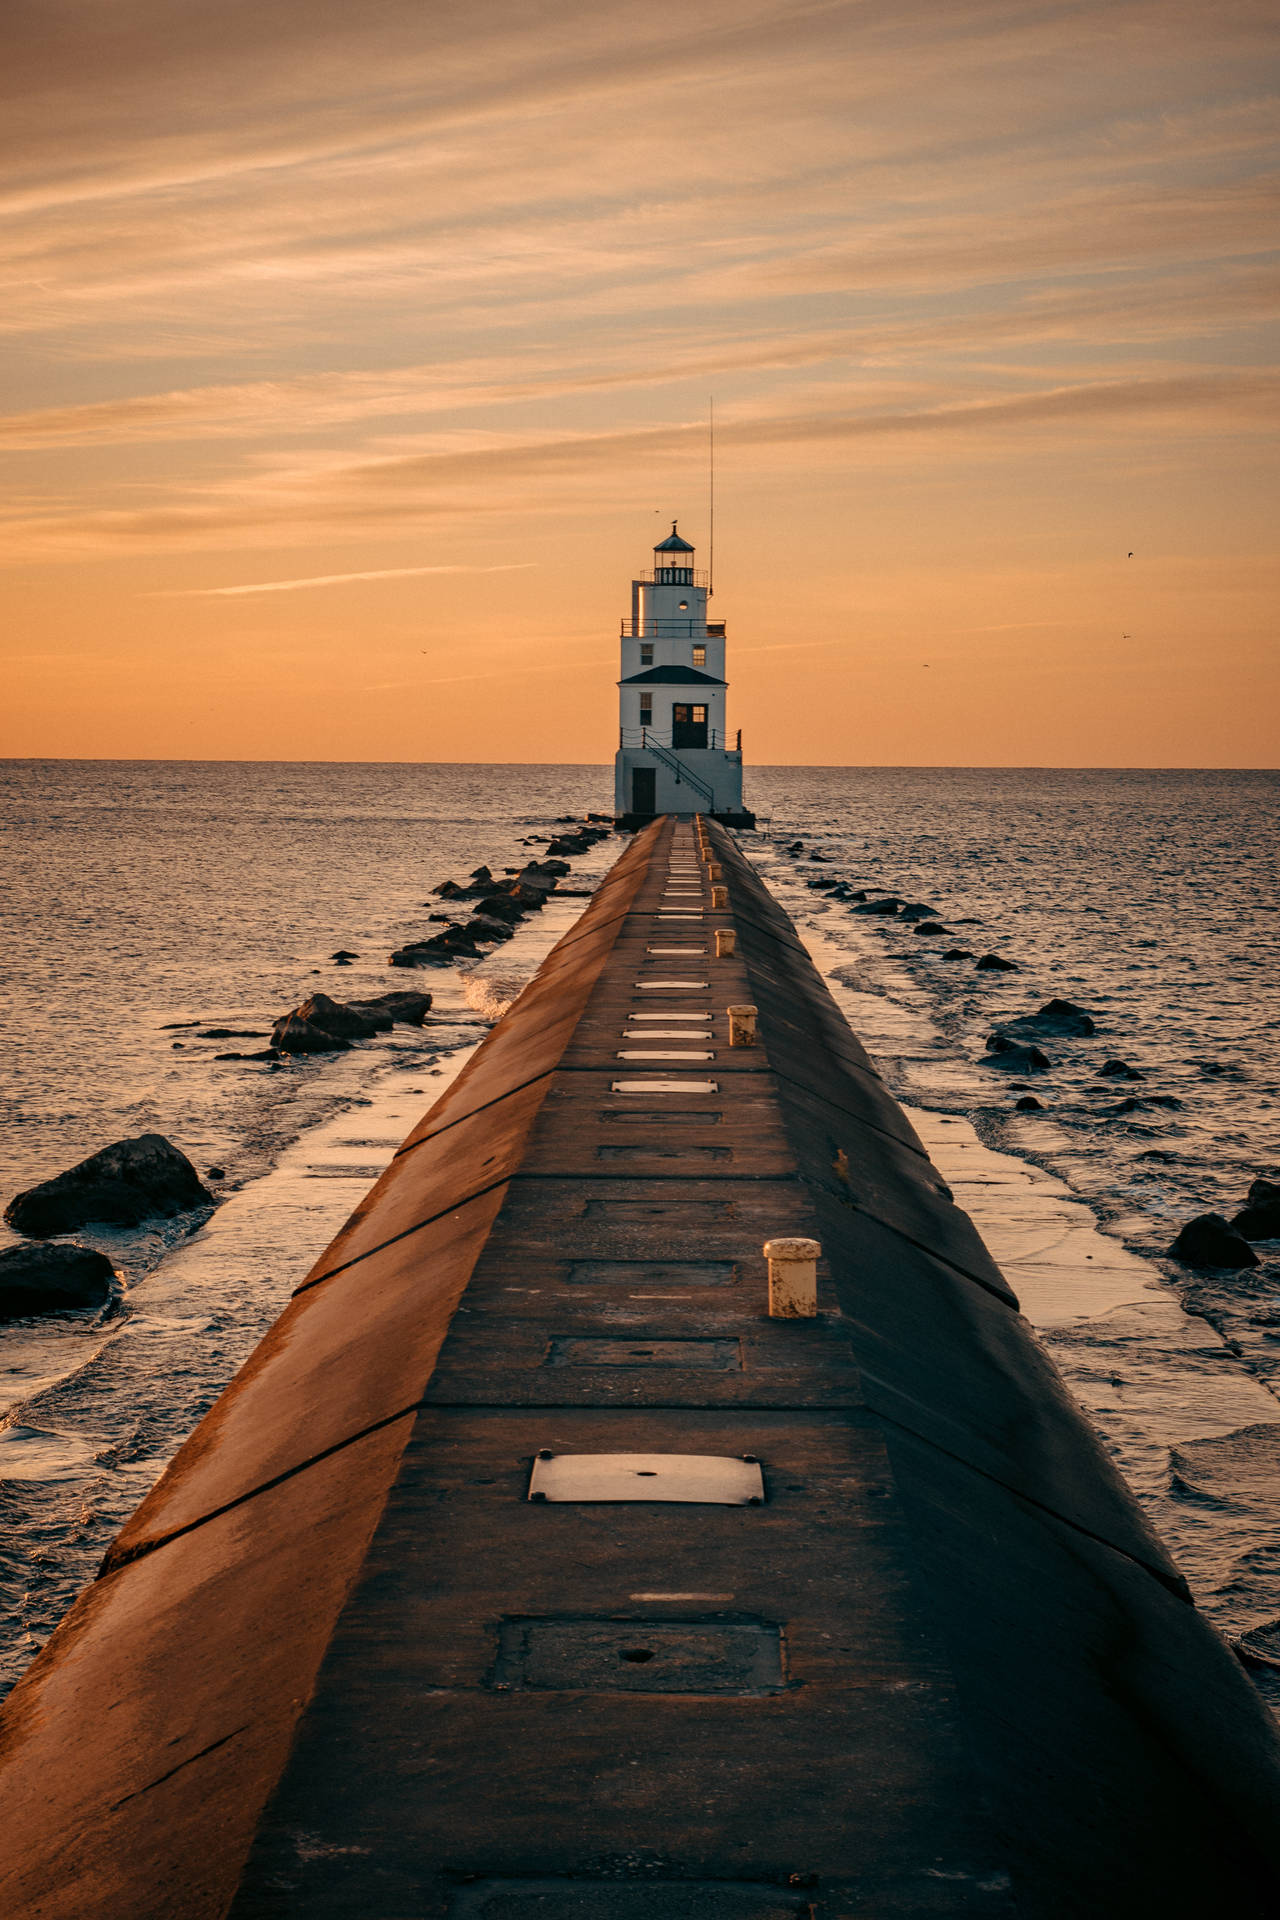 Lighthouse Scenery For Iphone Screens Wallpaper